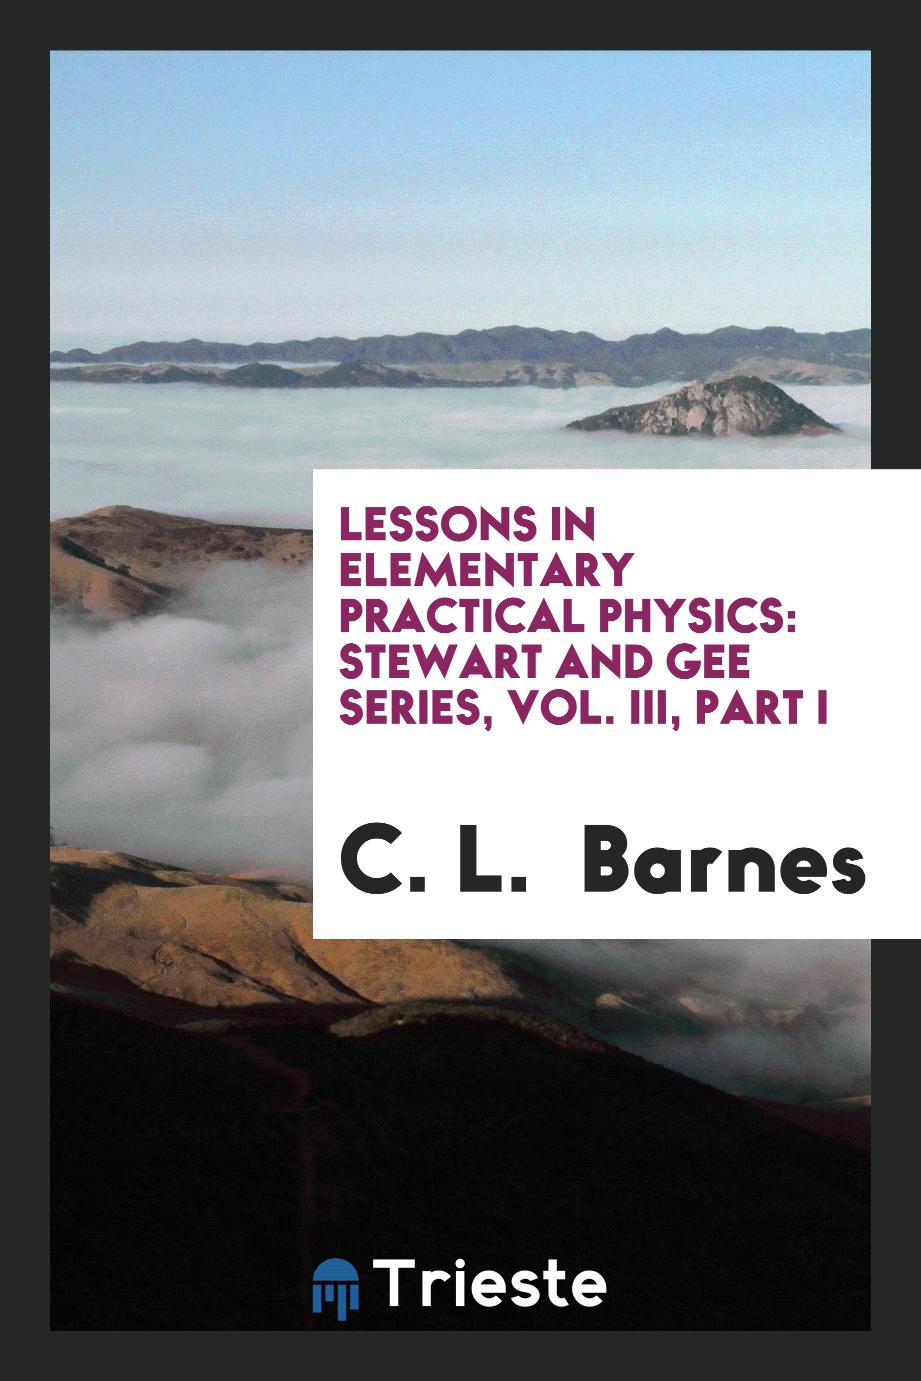 Lessons in elementary practical Physics: stewart and gee series, Vol. III, Part I